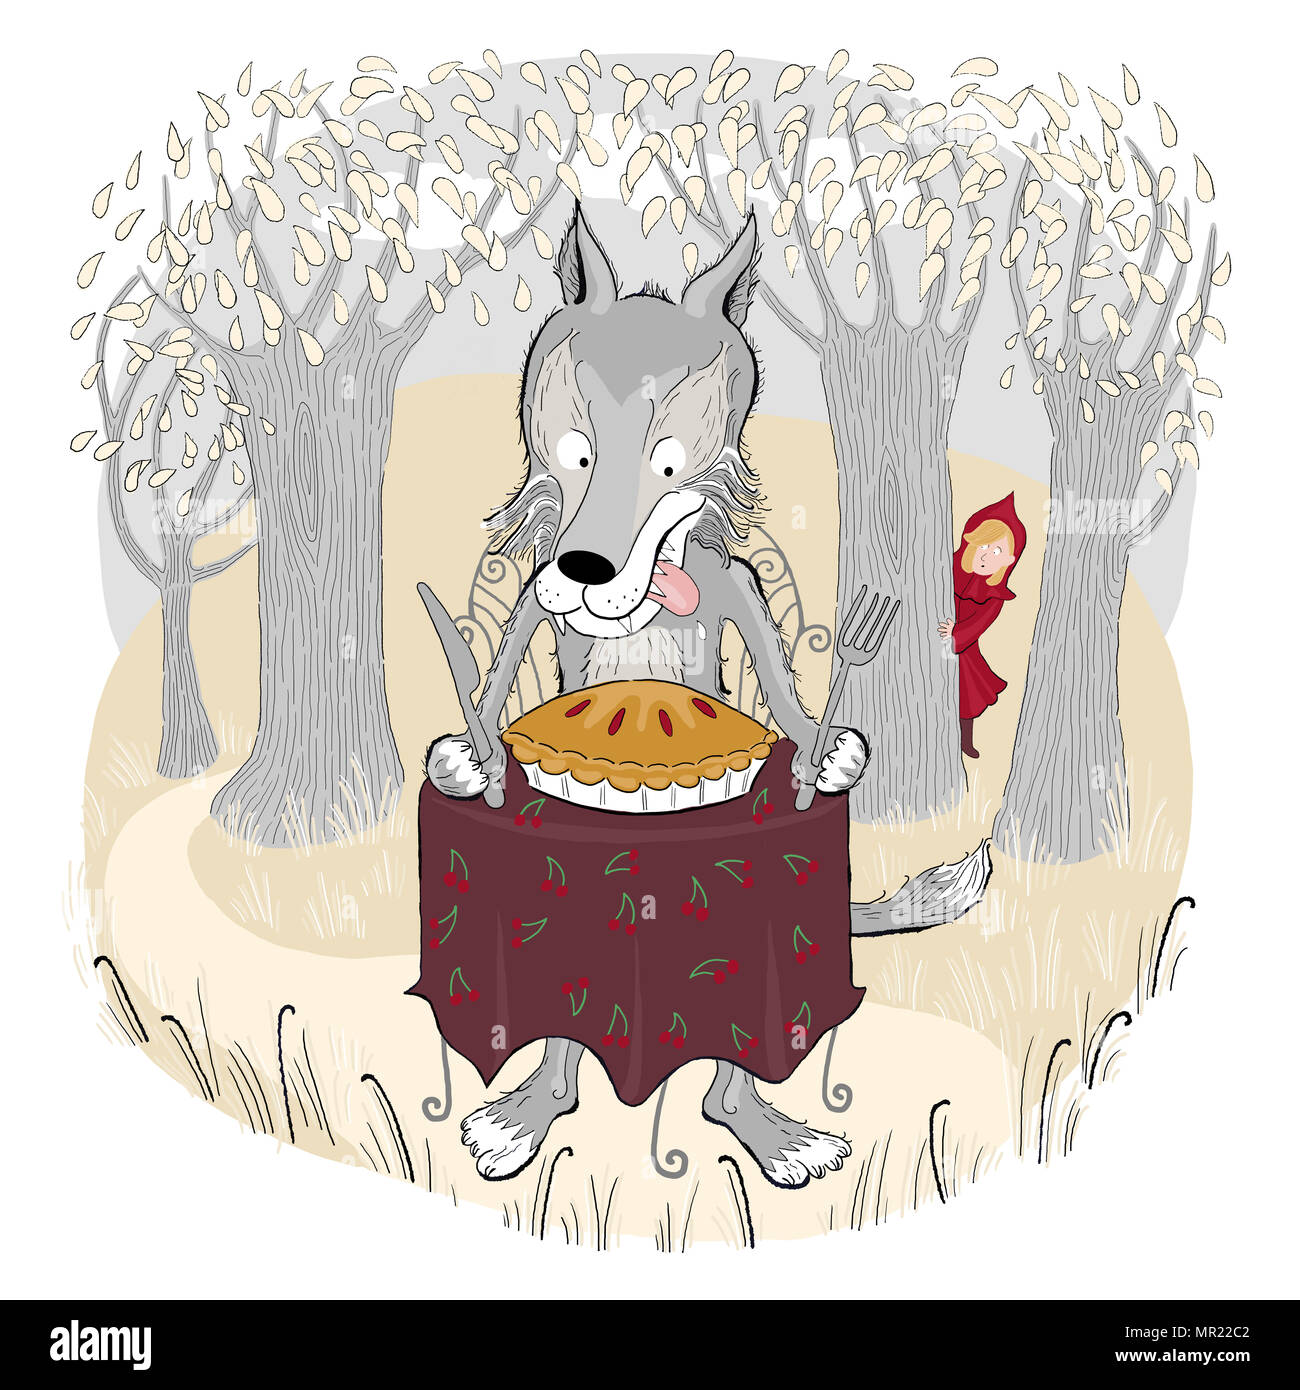 An illustration of Little Red Riding Hood, hiding behind a tree, and the Big Bad Wolf eating a cherry pie in the woods. Stock Photo